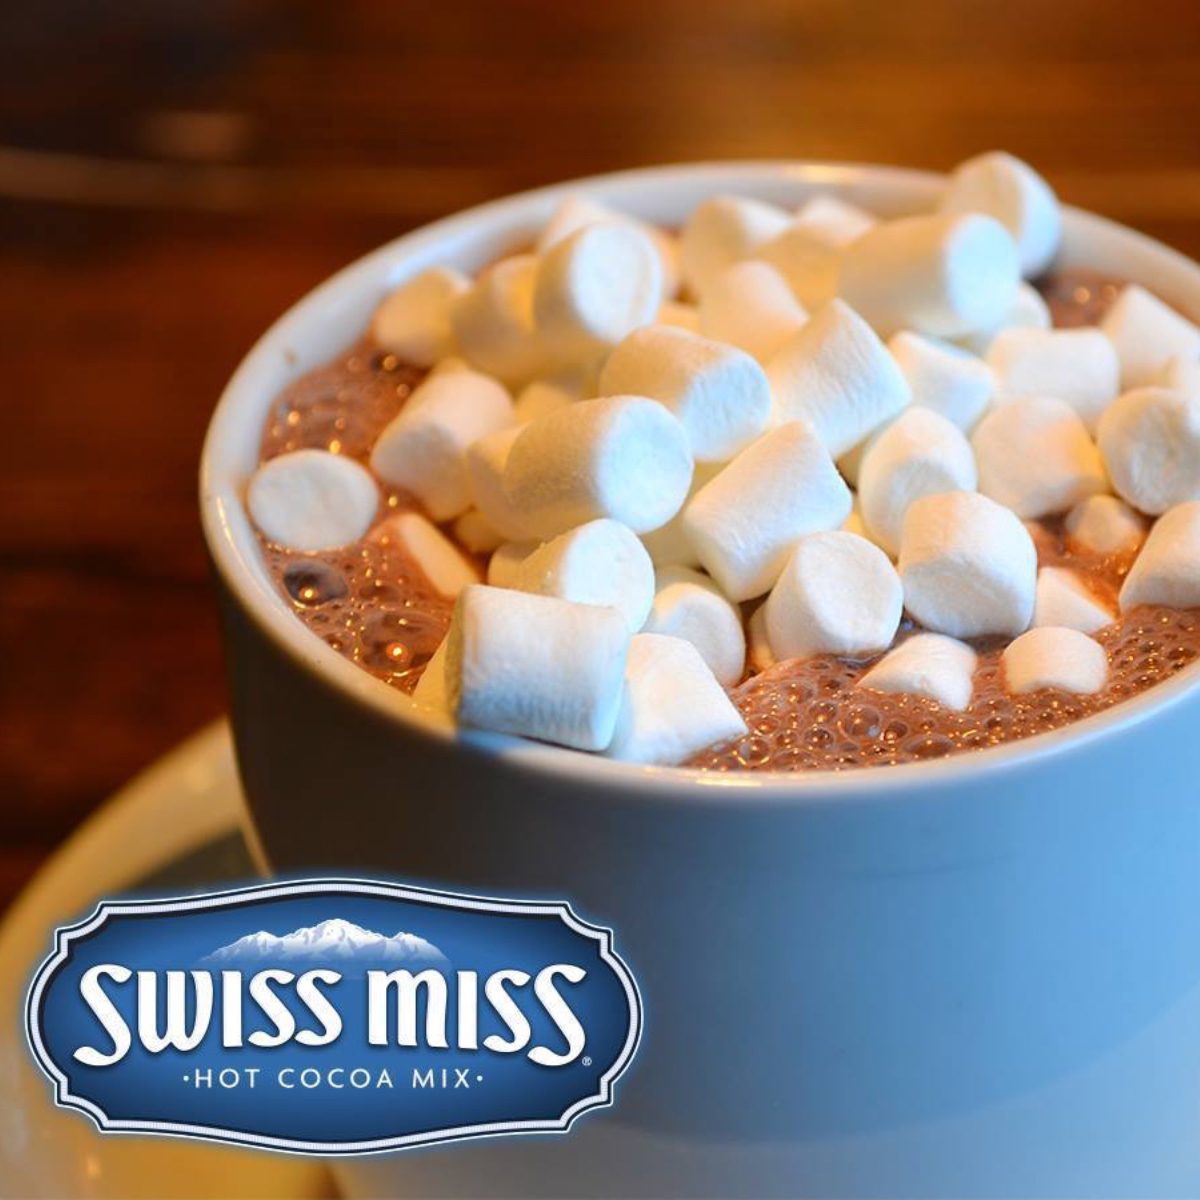 <p><strong><a class="SWhtmlLink" href="https://www.swissmiss.com/" rel="noopener noreferrer">Swiss Miss</a>, Menomonie </strong></p> <p>The famous packets of Swiss Miss hot chocolate weren't originally invented for consumers. They were exclusively served on airlines since the powdered milk package was lightweight and the flight attendants only had to add hot water to make the drink.</p>